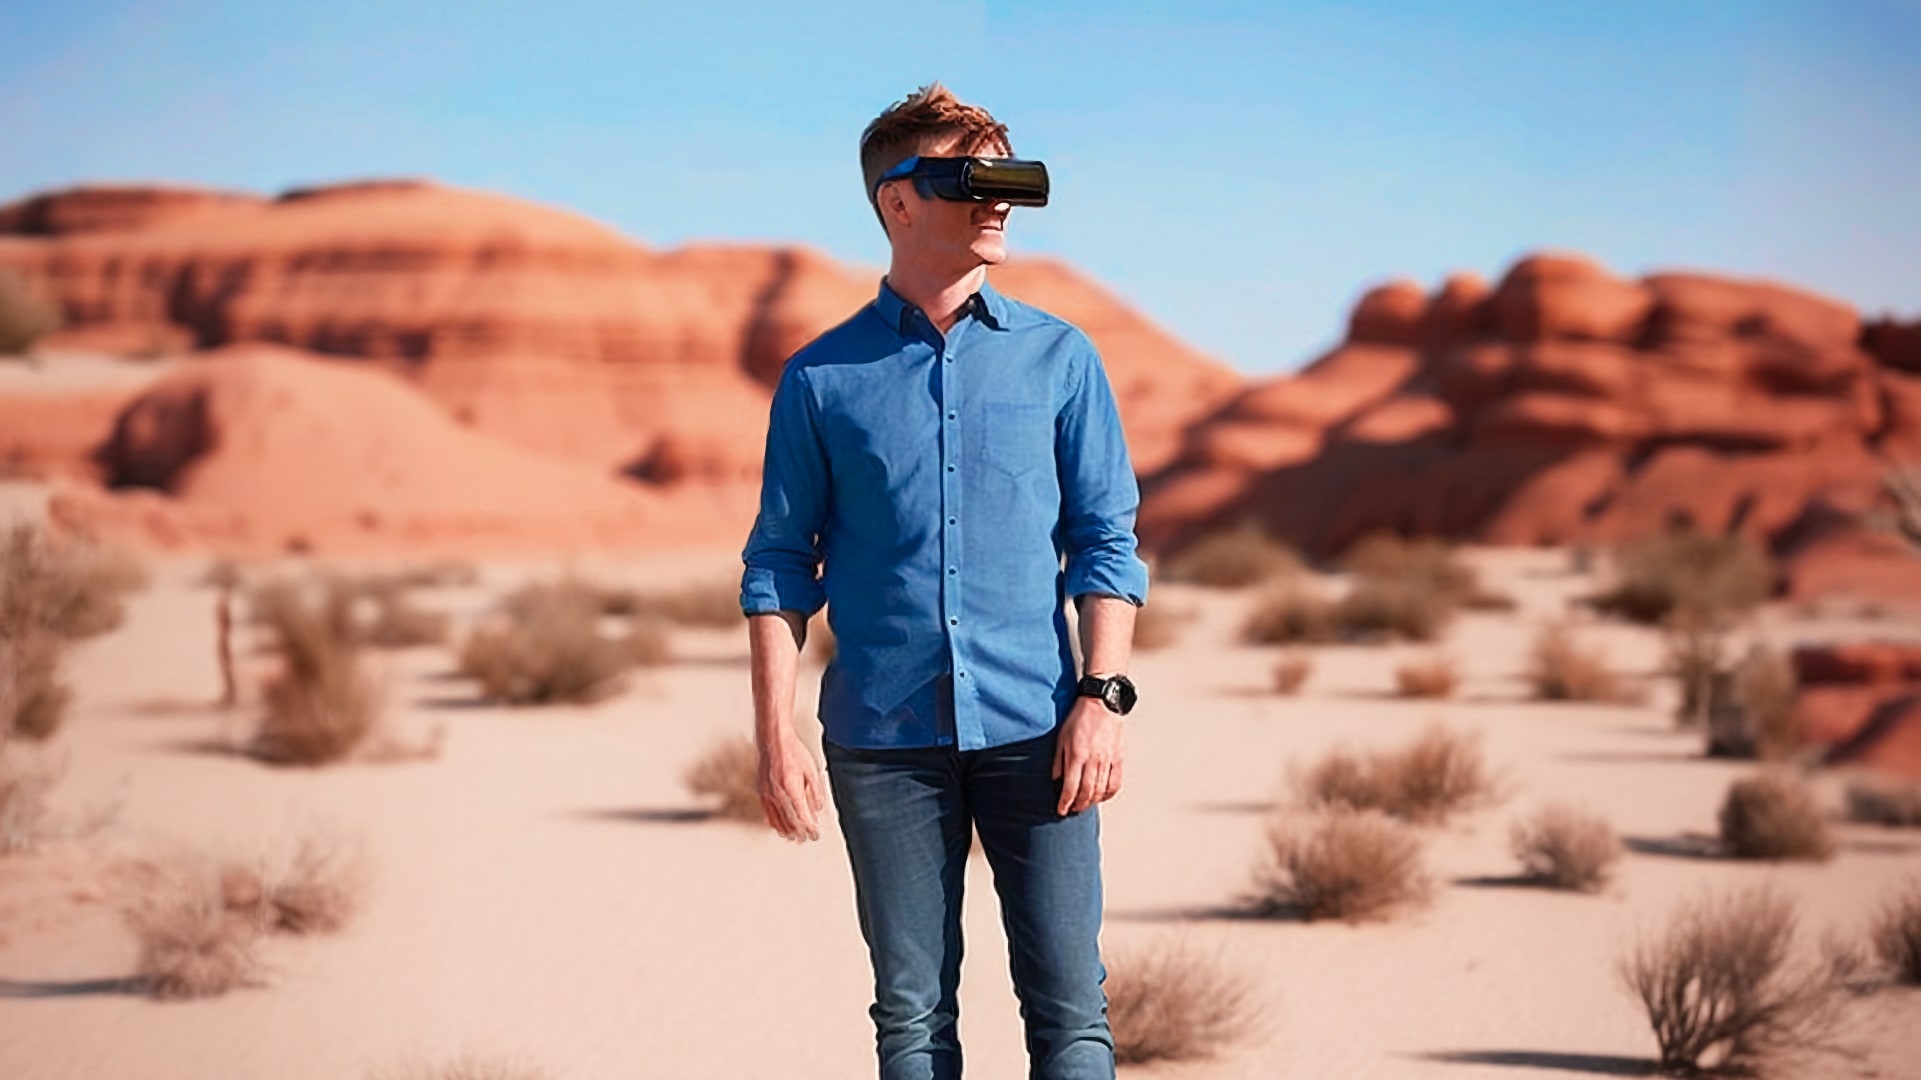 Next-Generation VR headsets: What’s missing?